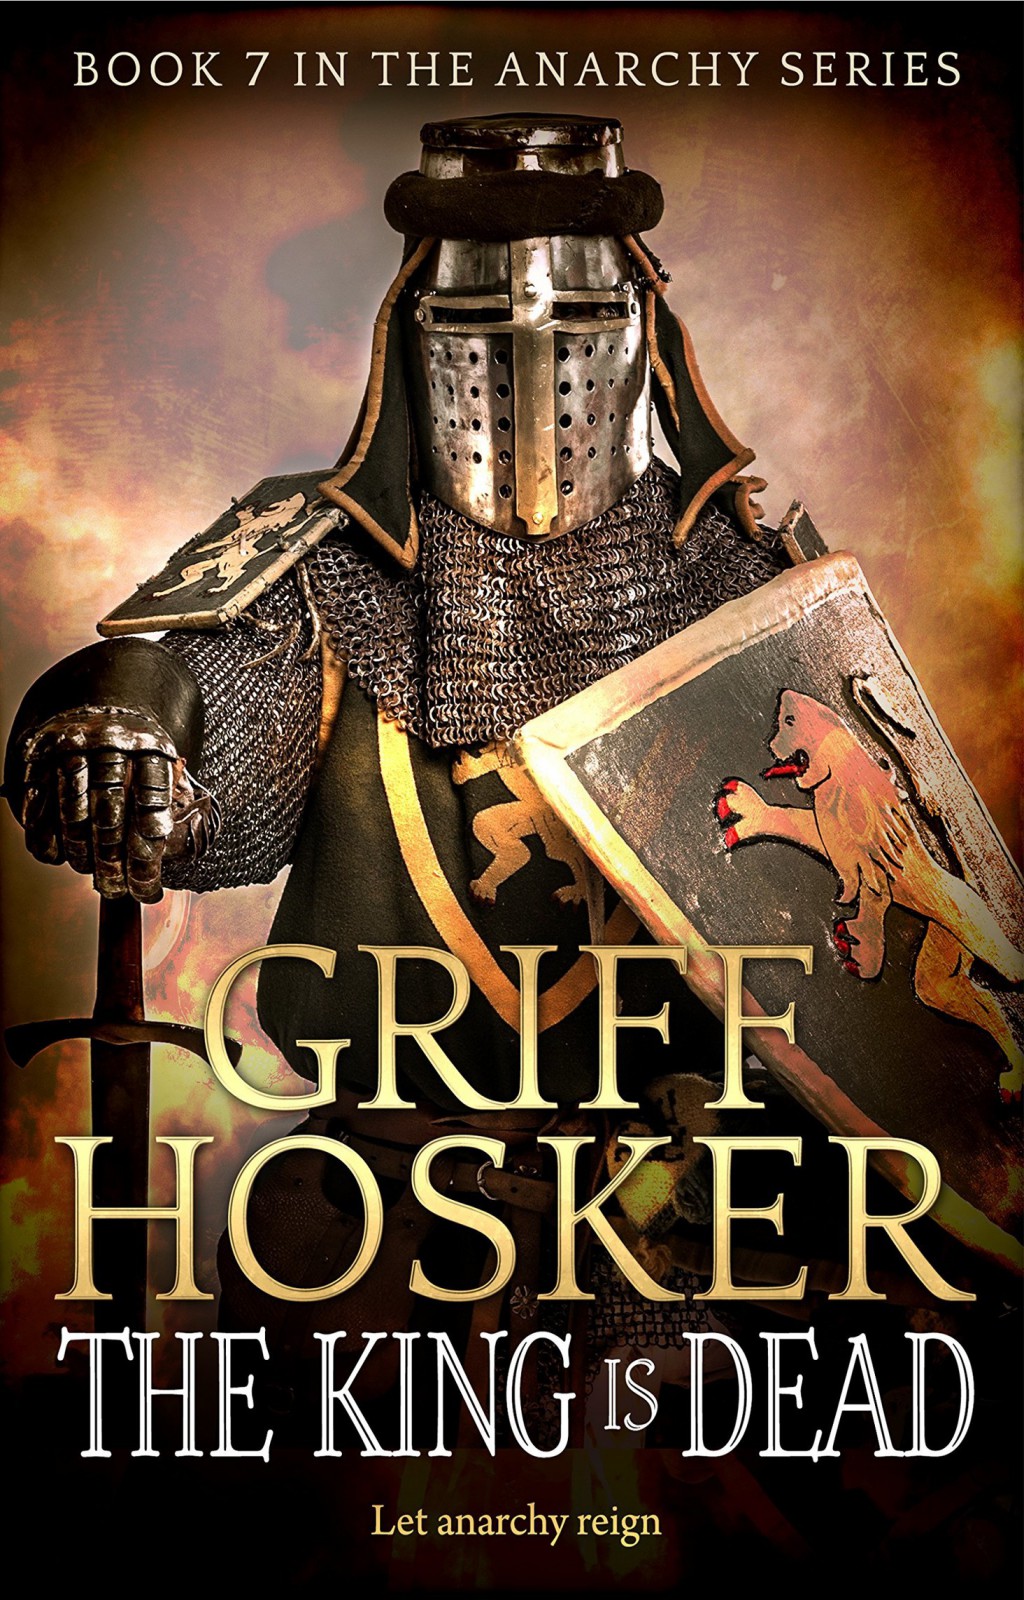 The King Is Dead by Griff Hosker